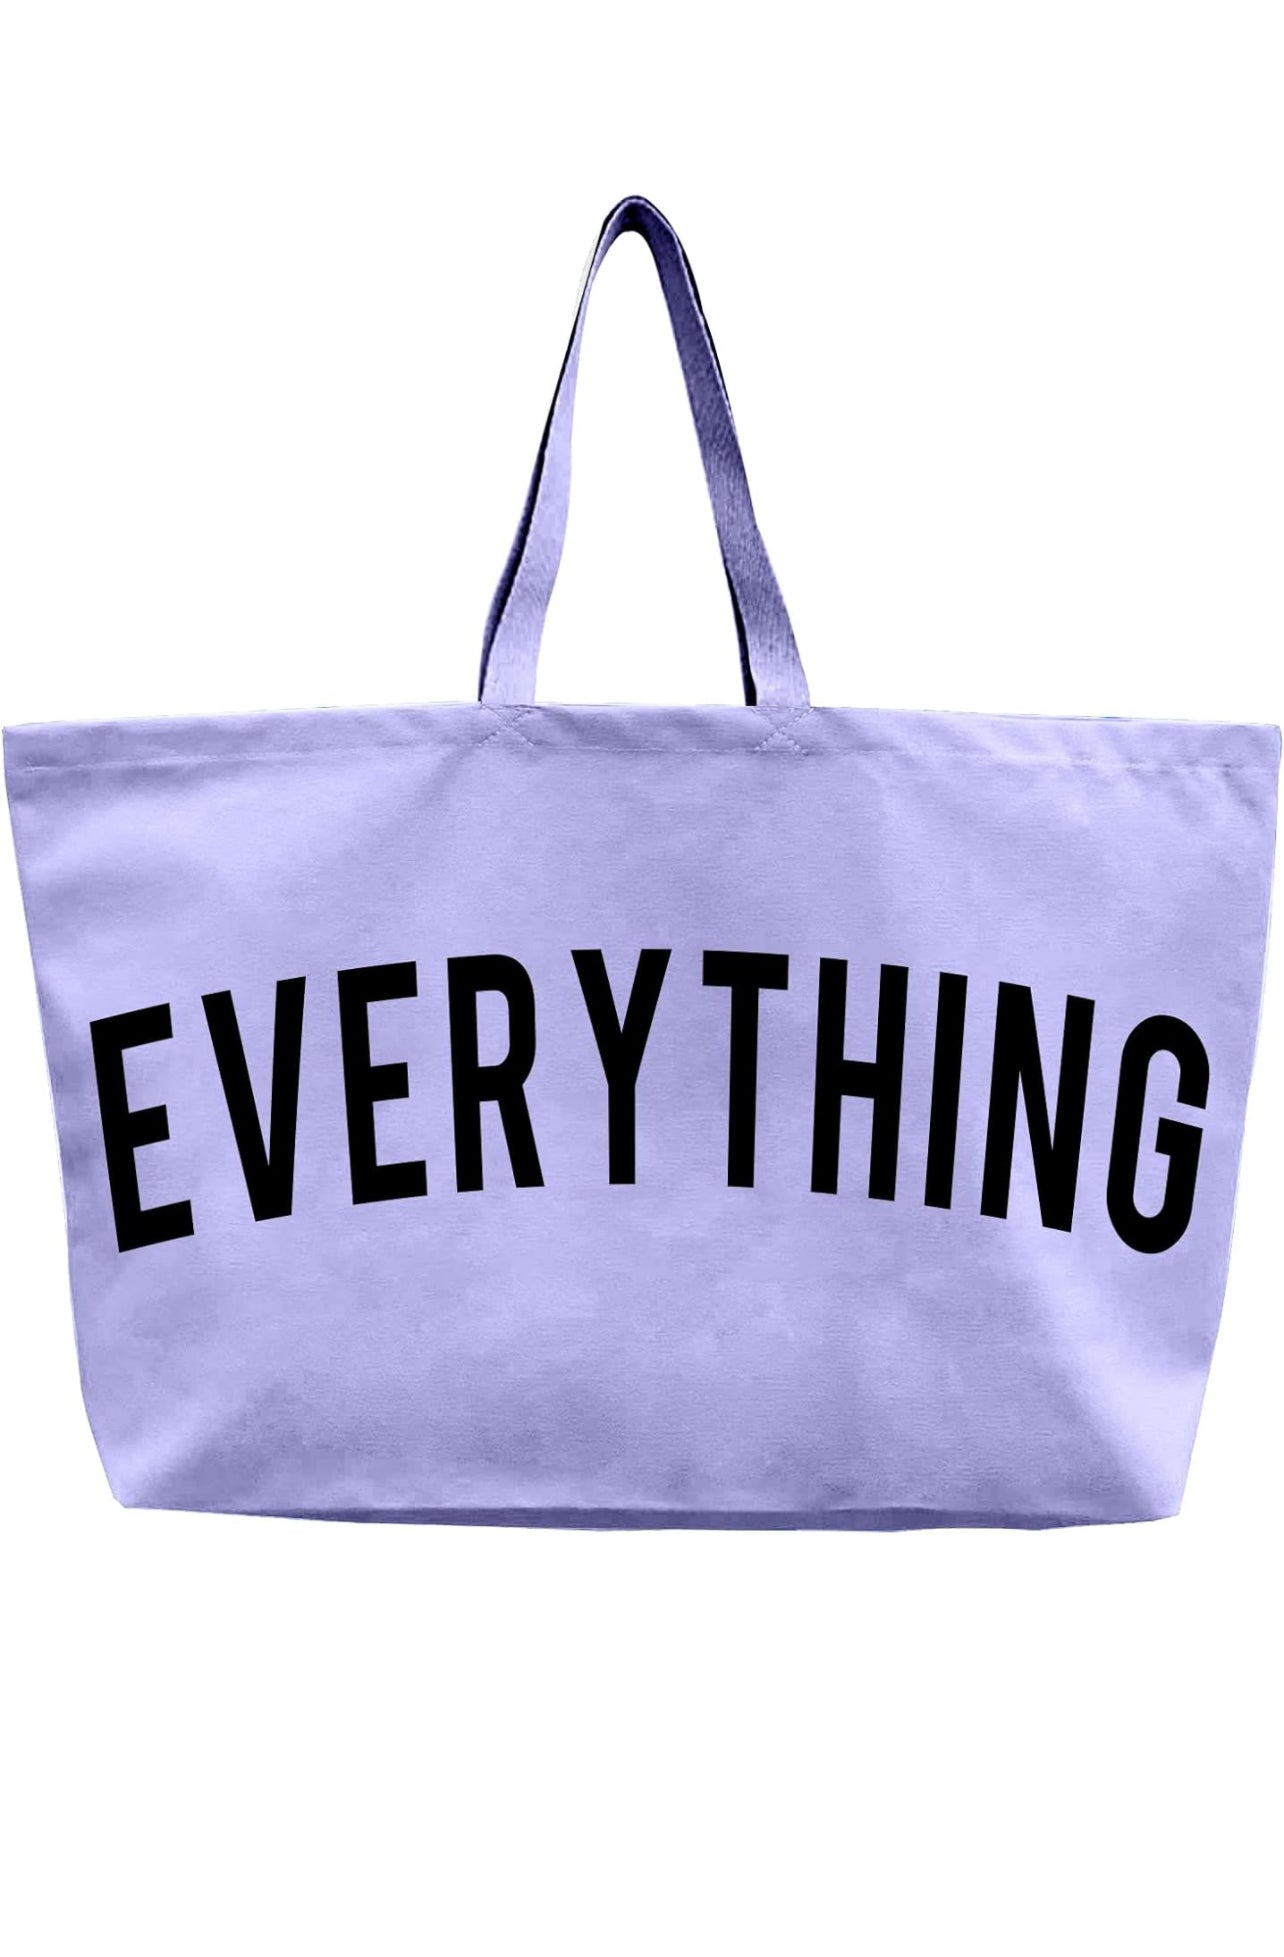 The “Everything “ Tote